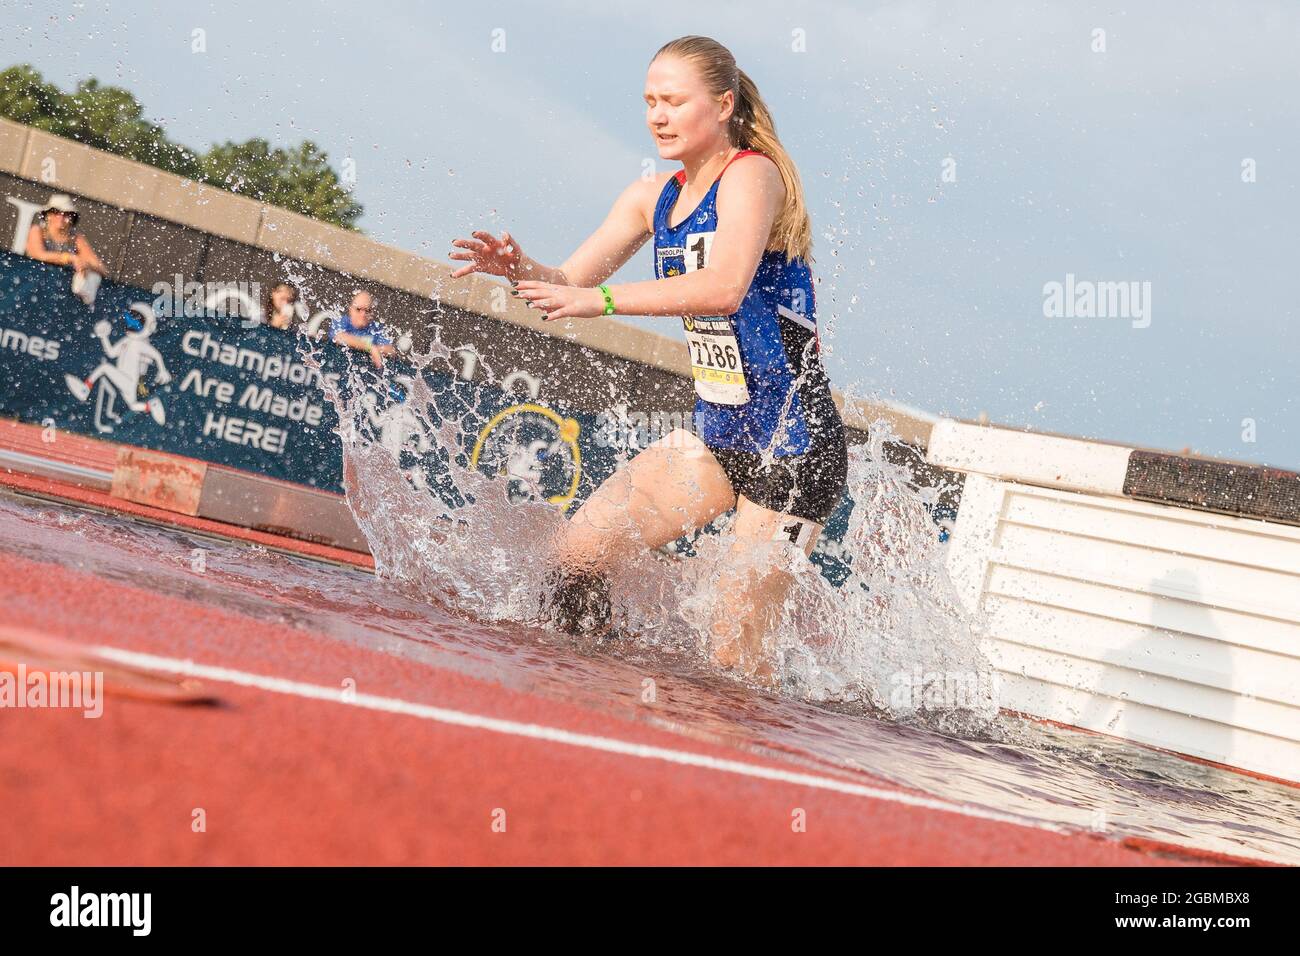 August 4, 2021: Shannon Quinn competes in the Girls 2000 Meter Steeplechase  15-16 years old